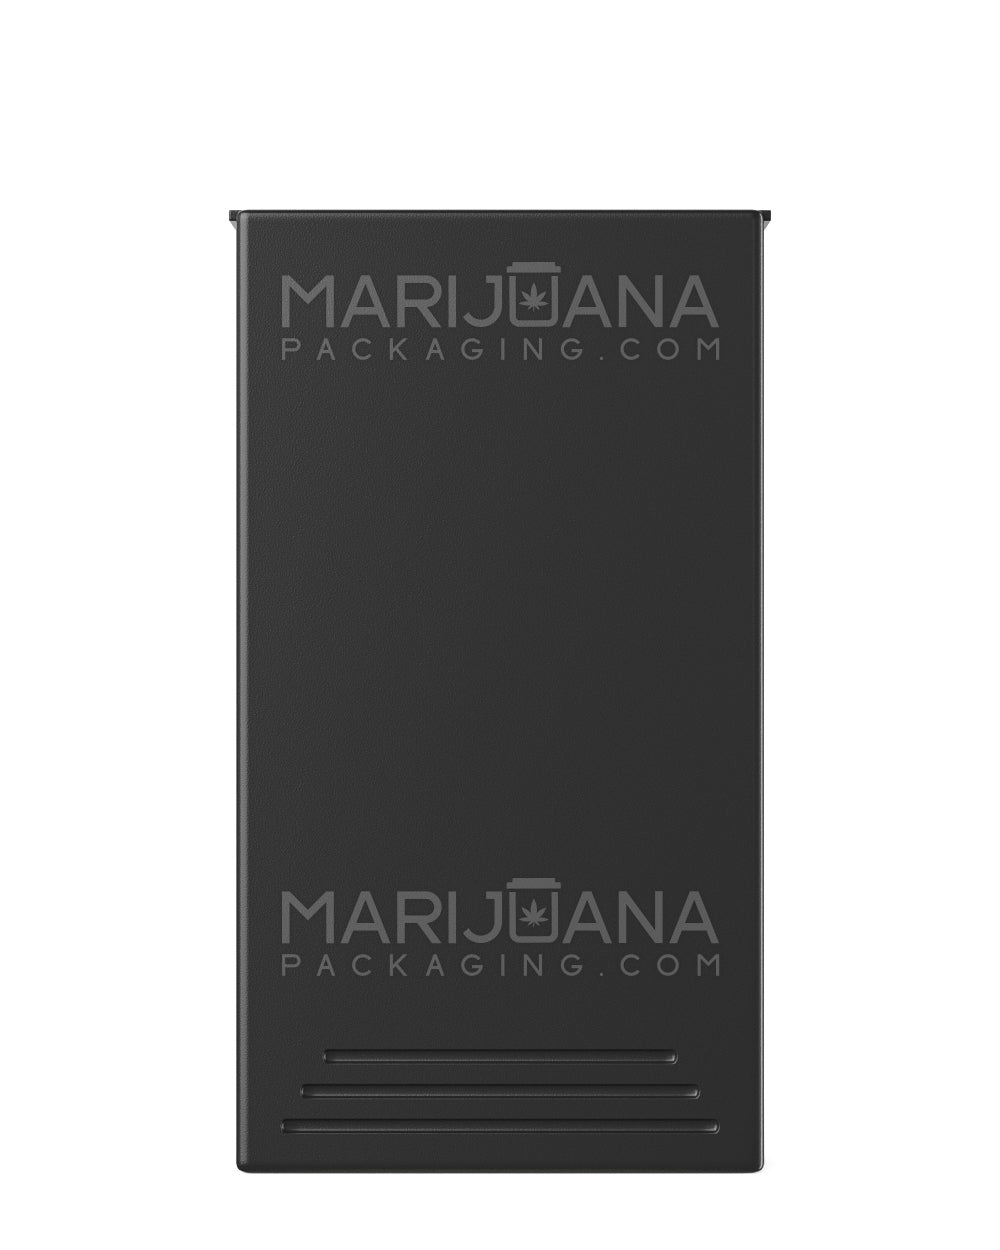 Child Resistant | Press 'N Pull Pre-Roll Joint Case | 115mm x 62mm - Black Plastic - 200 Count - 10